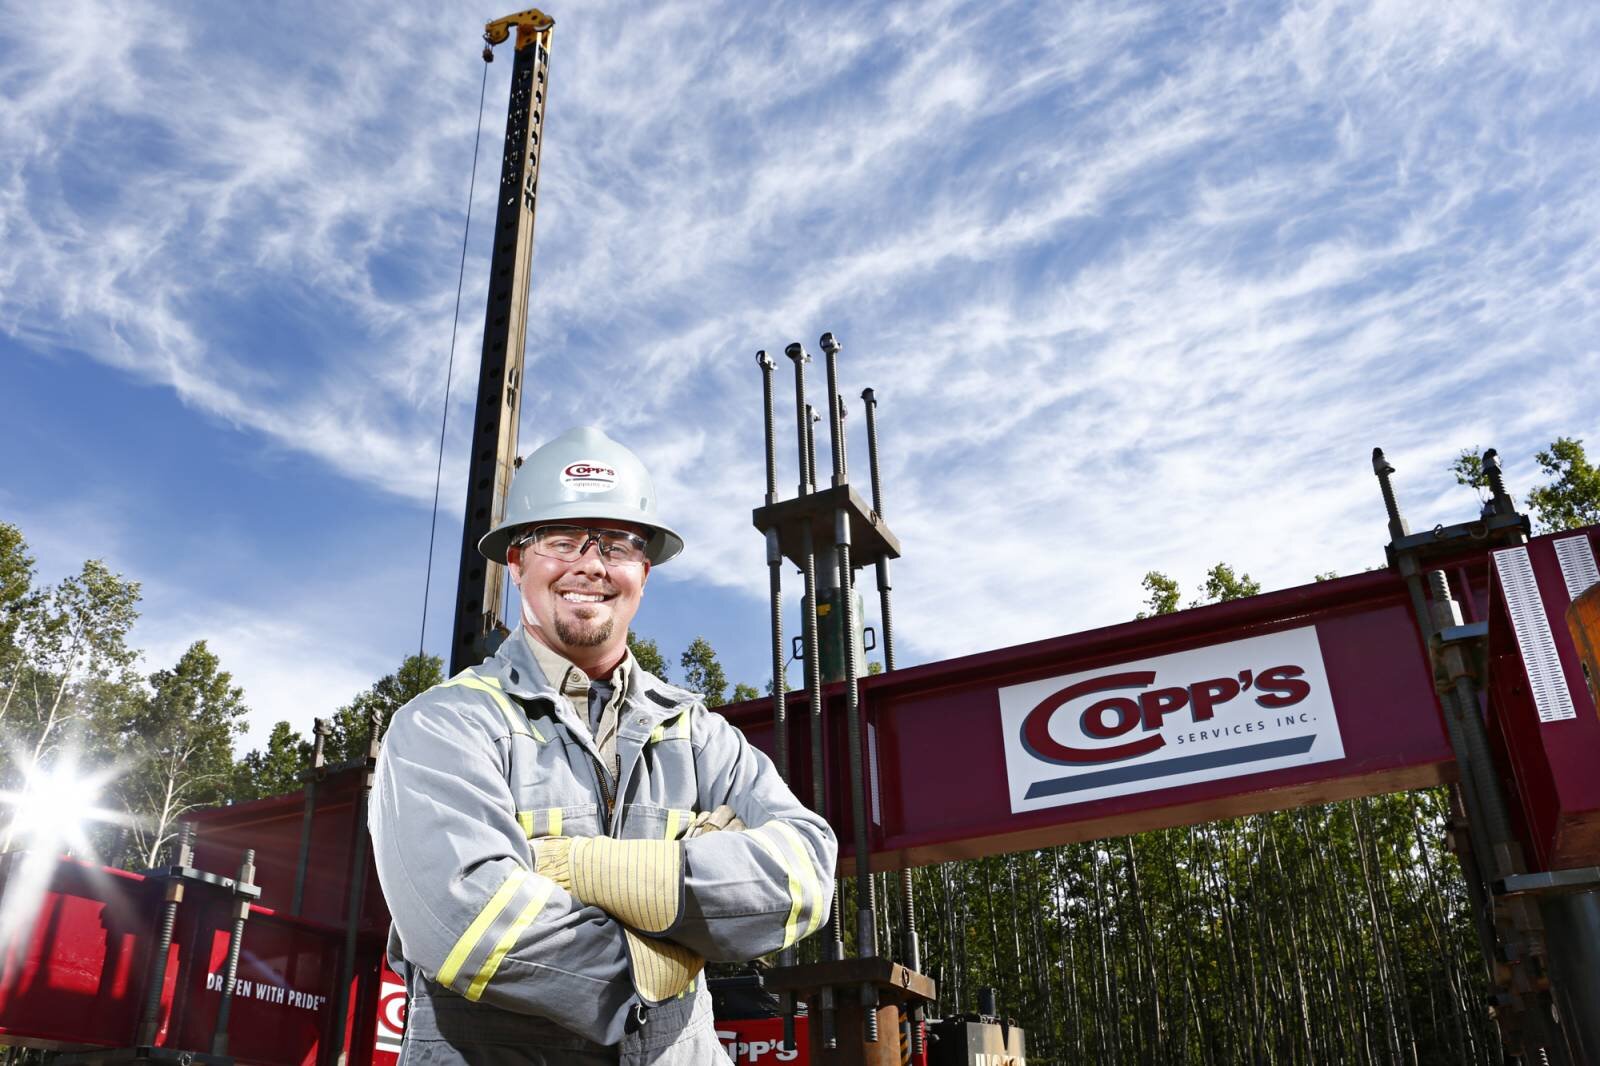 alberta oil gas services copps field worker bliss photographic.jpg